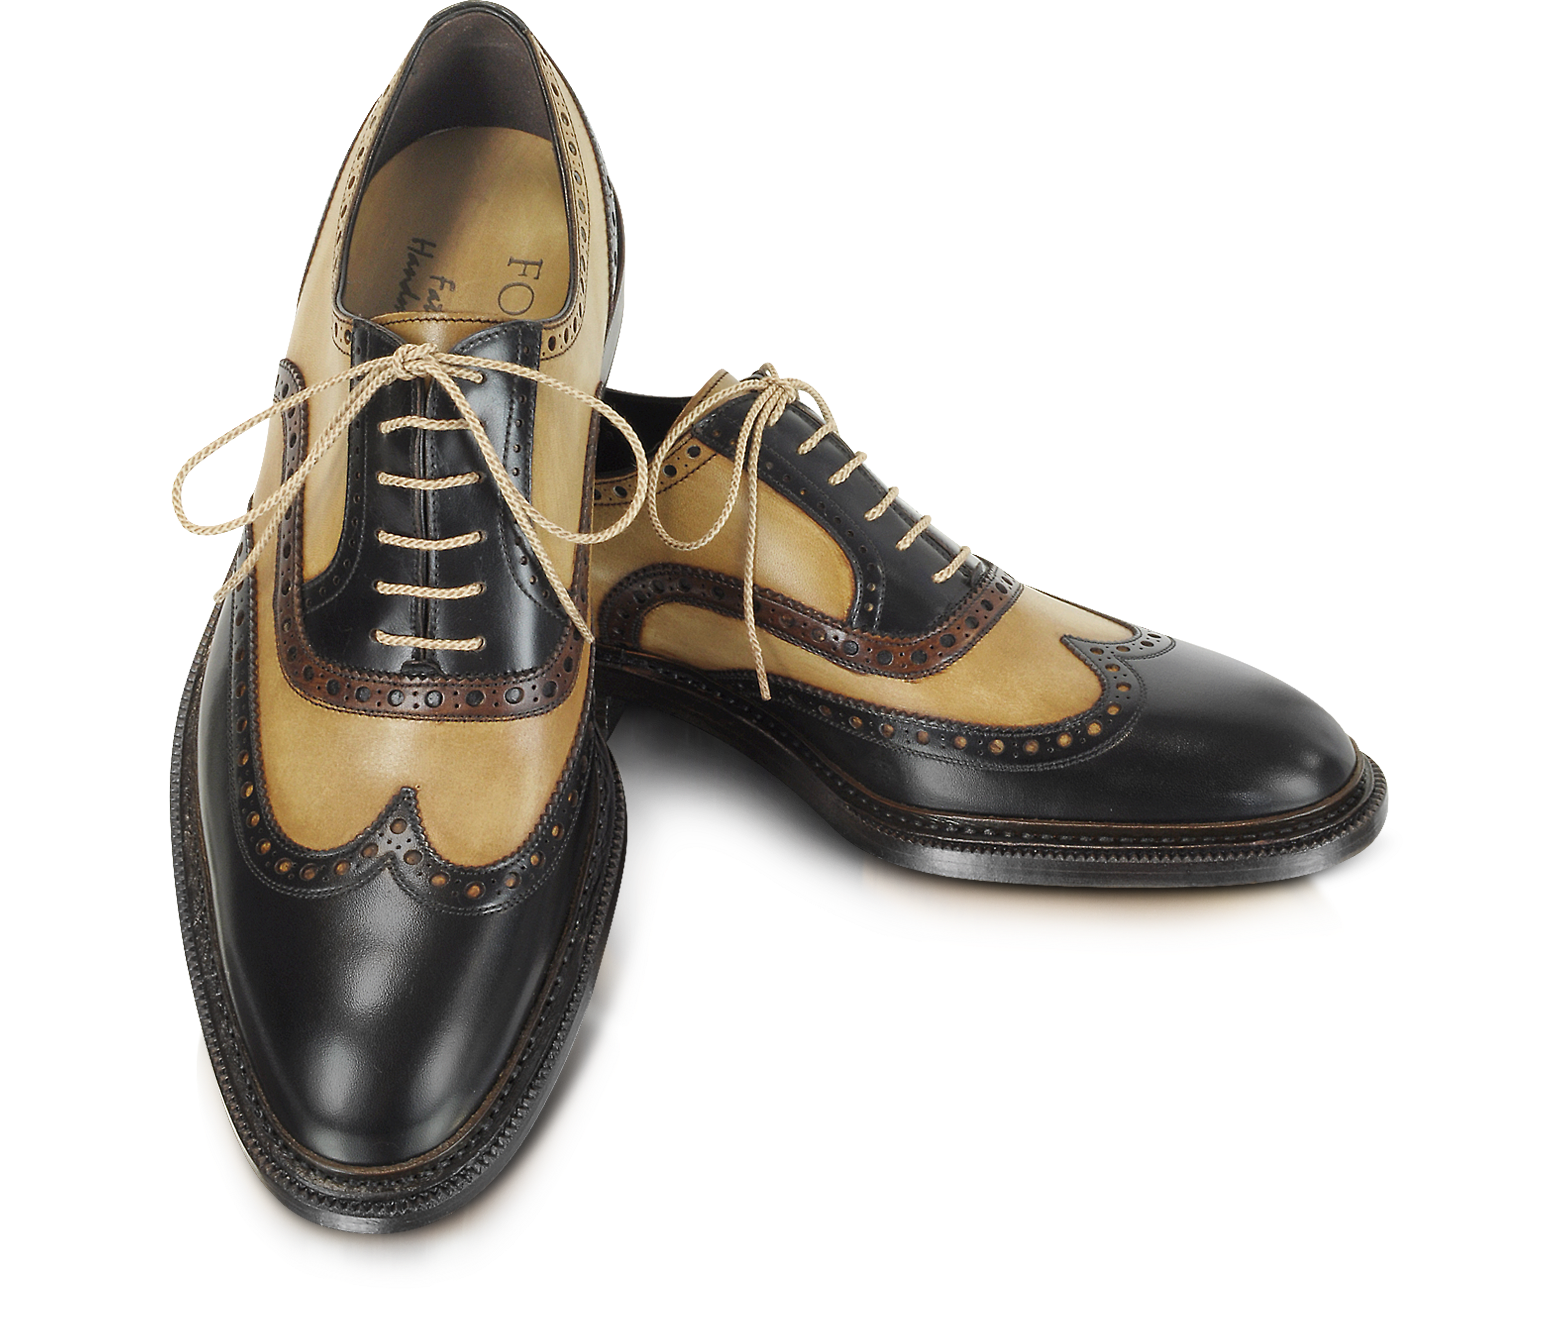 Two-tone Wingtip Oxford Shoes 